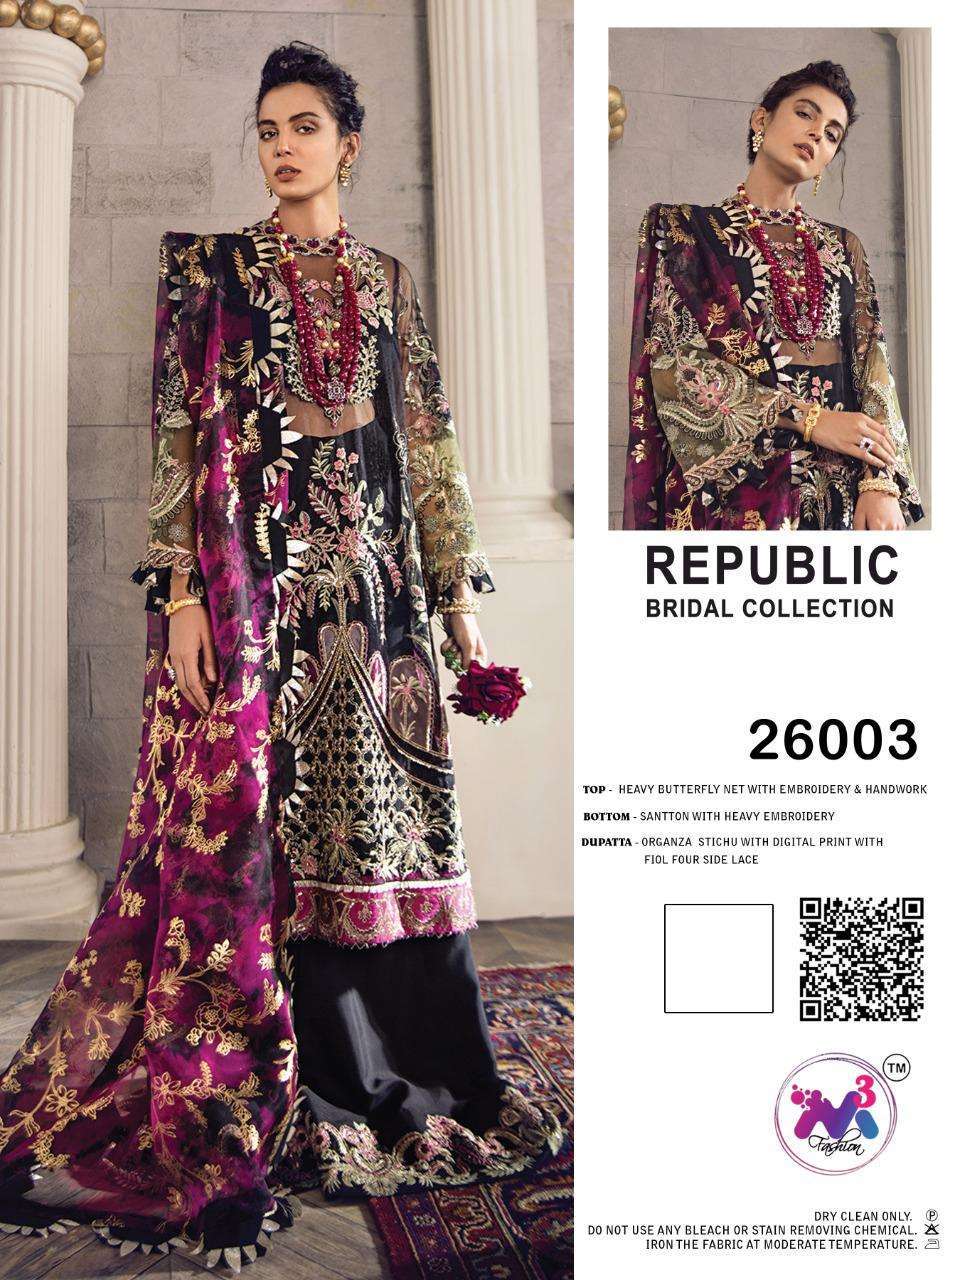 REPUBLIC BRIDAL COLLECTION BY M3 FASHION 26001 TO 26003 SERIES BEAUTIFUL STYLISH PAKISATNI SUITS FANCY COLORFUL CASUAL WEAR & ETHNIC WEAR & READY TO WEAR BUTTERFLY NET WITH EMBROIDERY DRESSES AT WHOLESALE PRICE